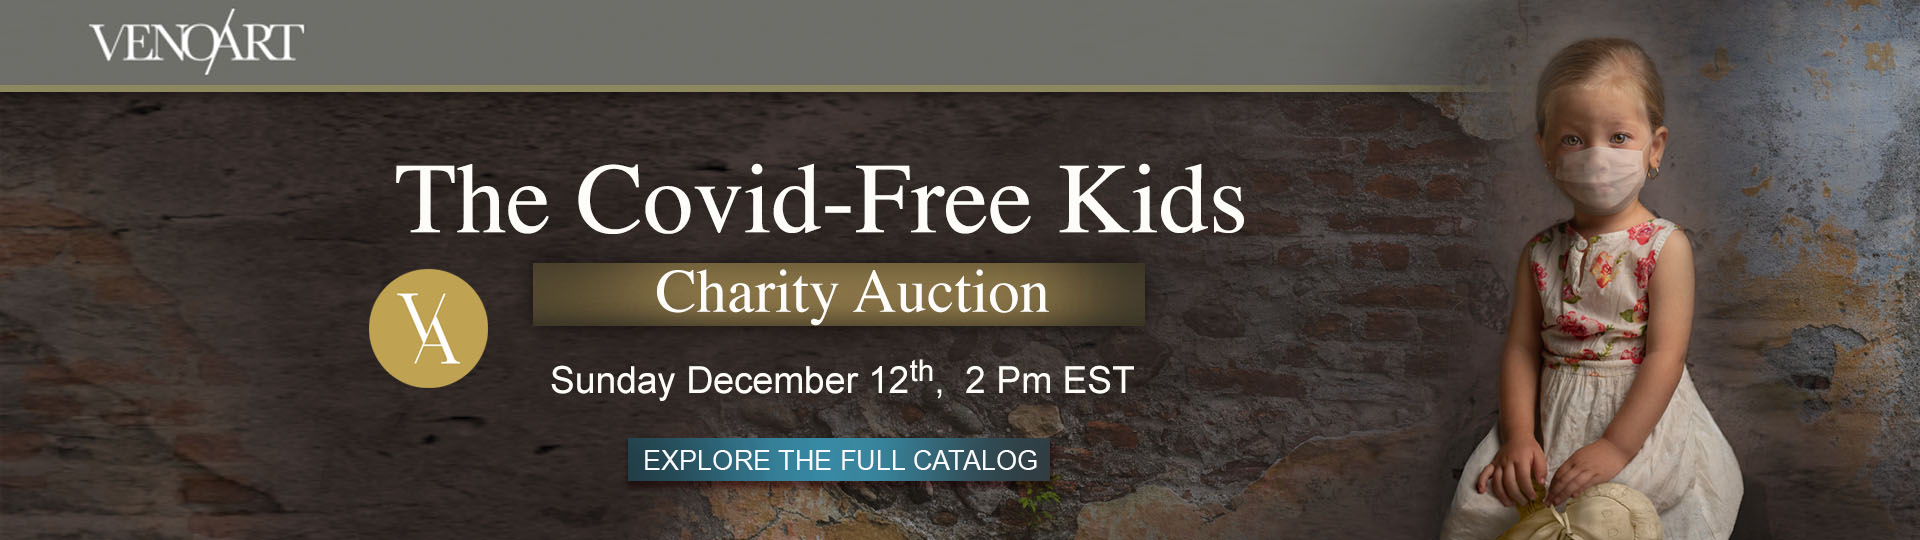 Covid-Free Kids Charity Auction